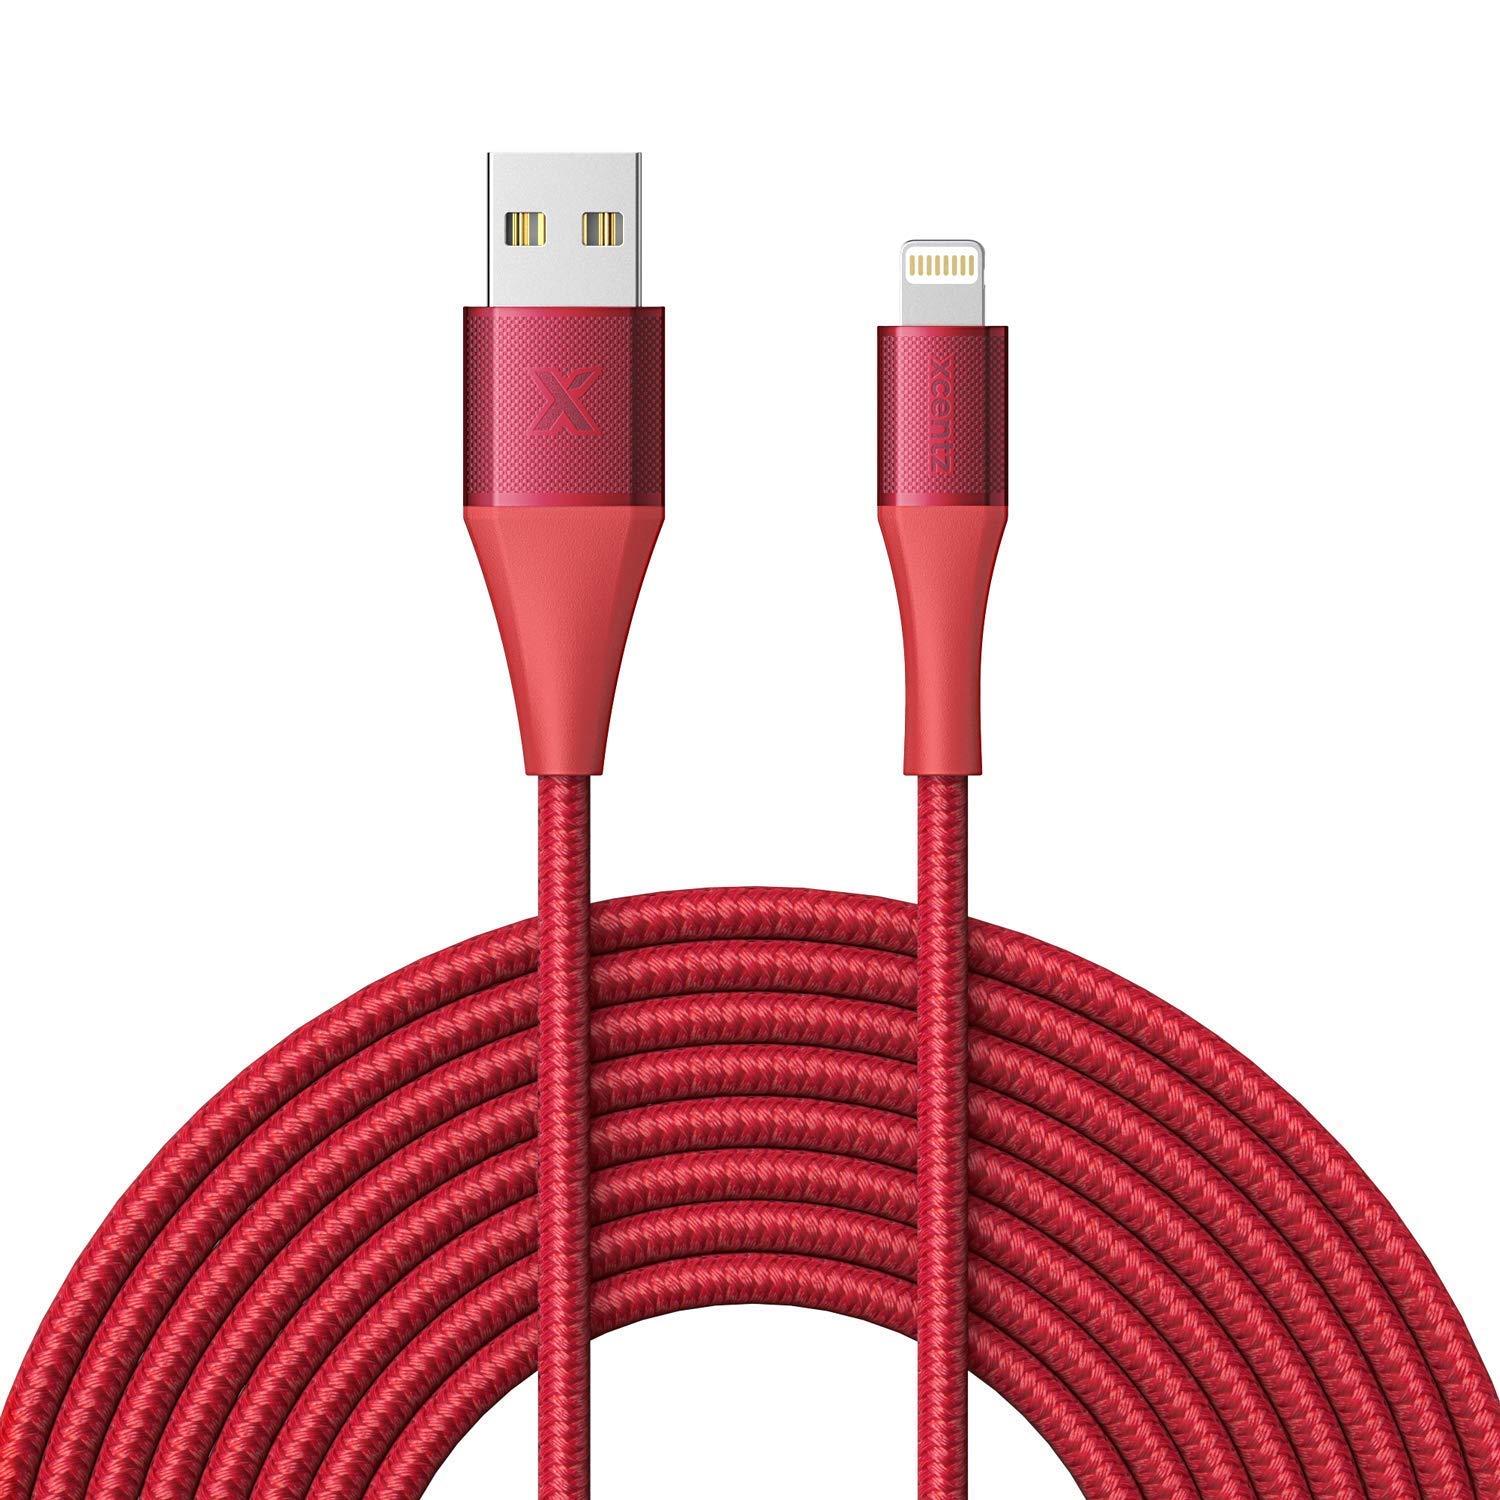 Book Cover XCENTZ iPhone Charger 10ft, MFi Certified Lightning Cable, Braided Nylon High-Speed iPhone Cable with Premium Metal Connector for iPhone 11/X/XS/XR/XS Max/8/7/6/5S/SE, iPad Mini/Air, Red